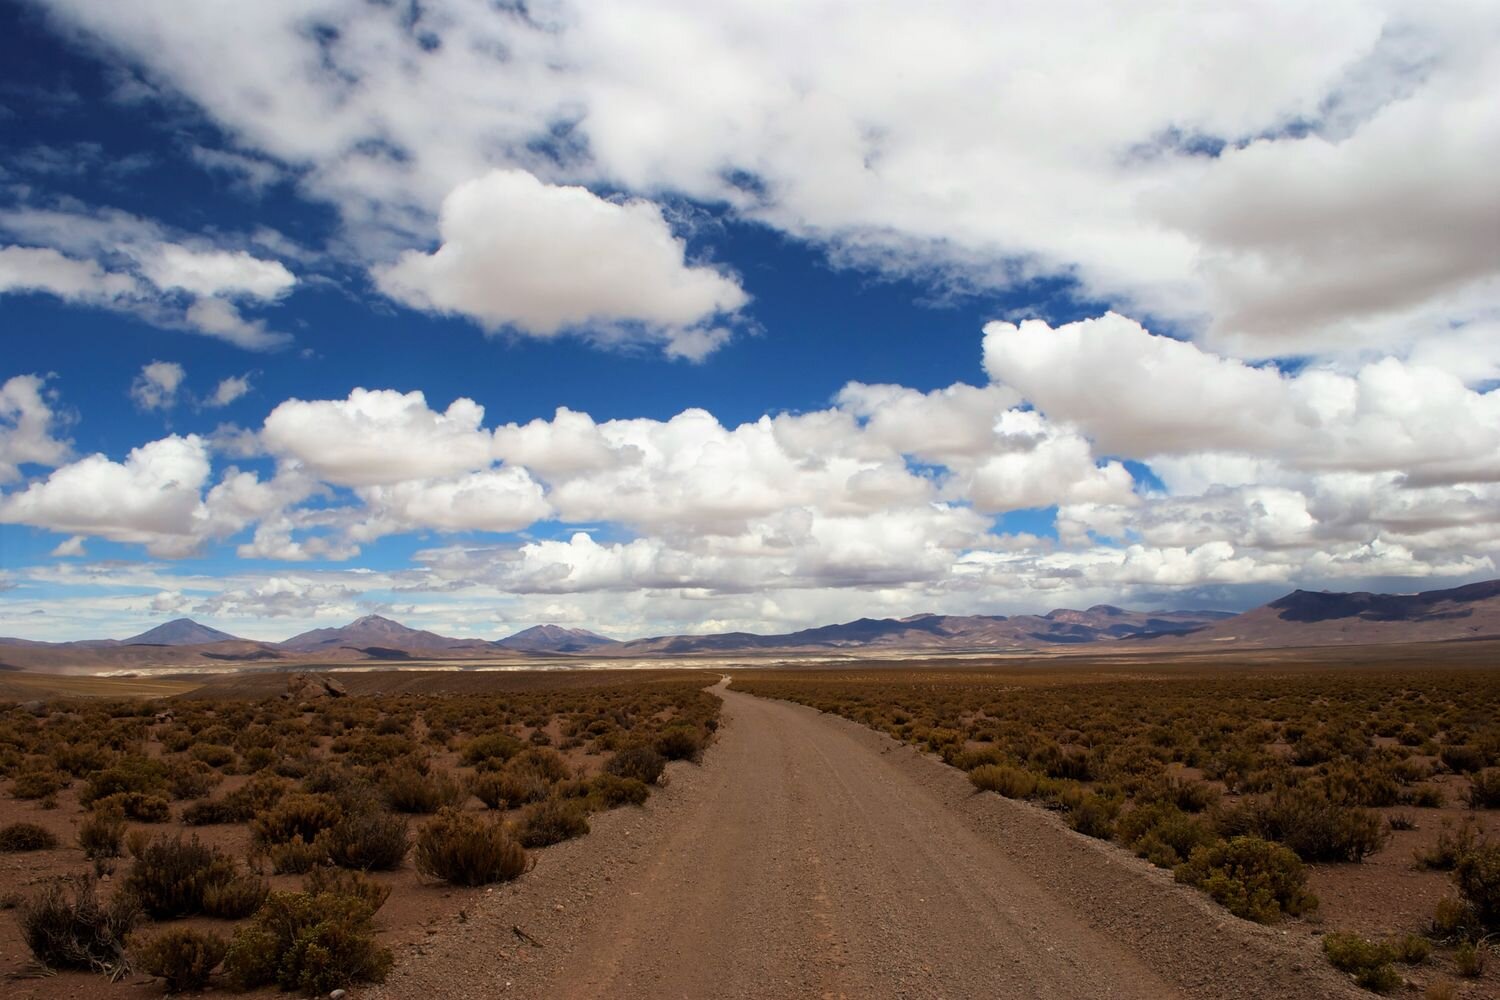  The dirt road bringing to llullaillaco National Park. Chilean Altiplano. 